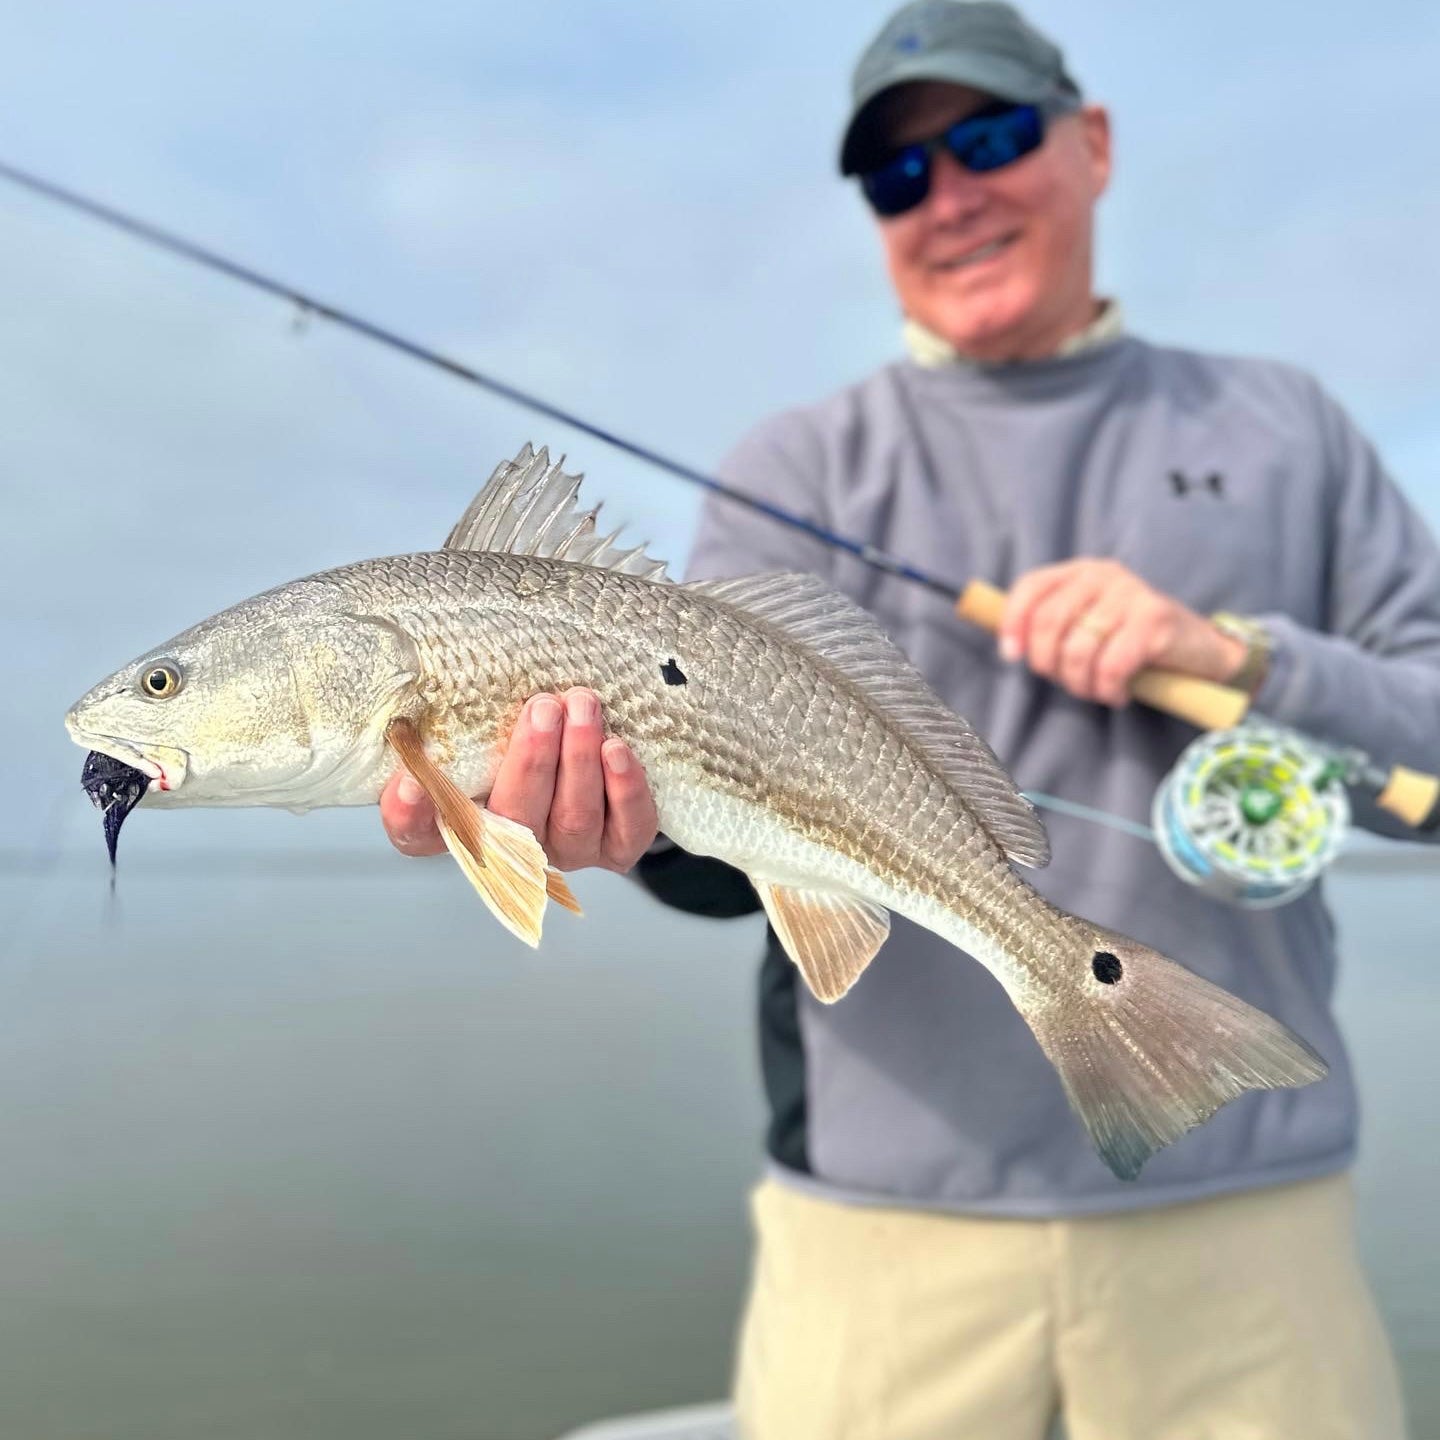 So stoked for Dave catching a lucky Bakers Dozen 13 🔥 redfish on the fly today!